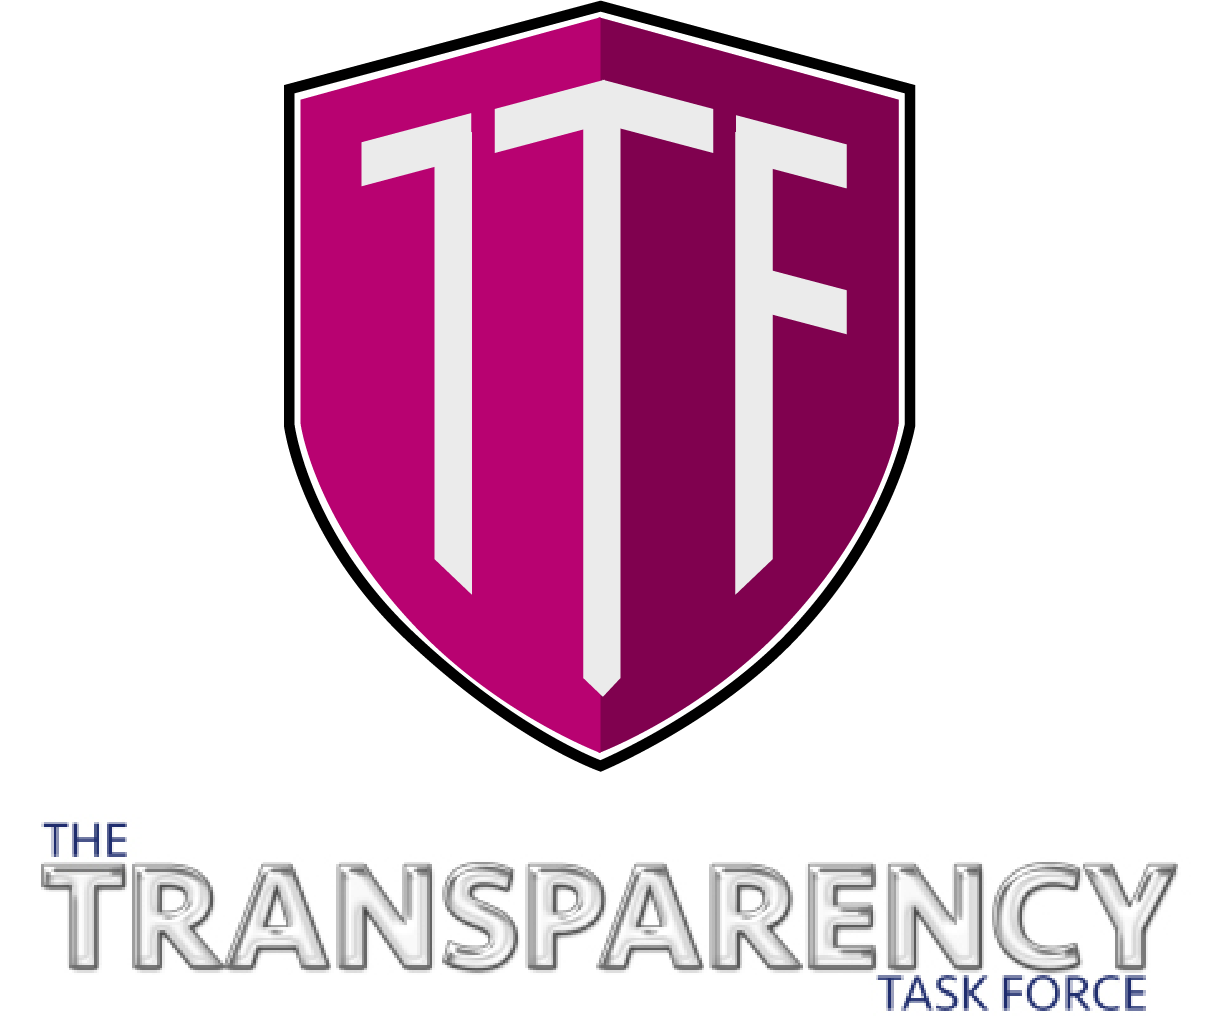 Fixing Banking organized by The Transparency Task Force